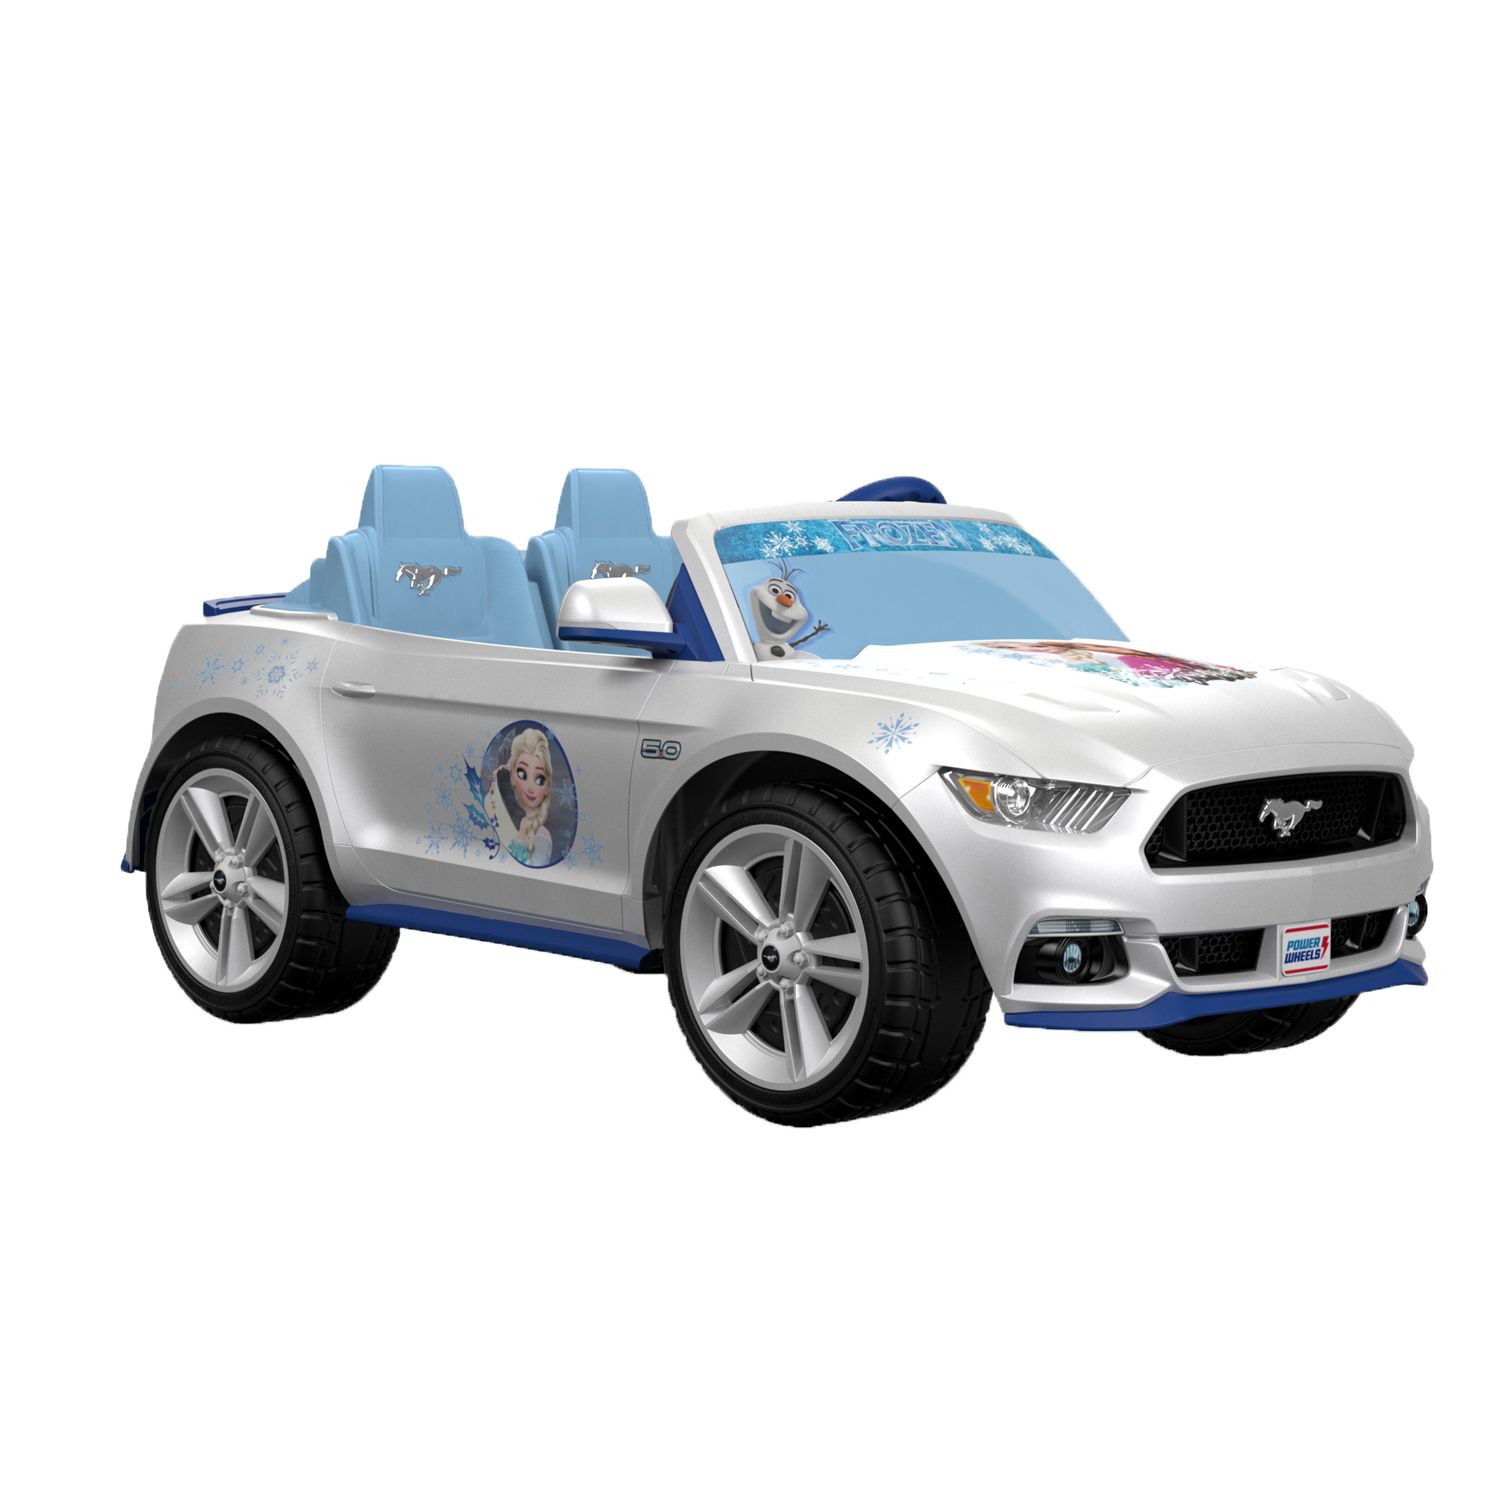 power wheels ford mustang